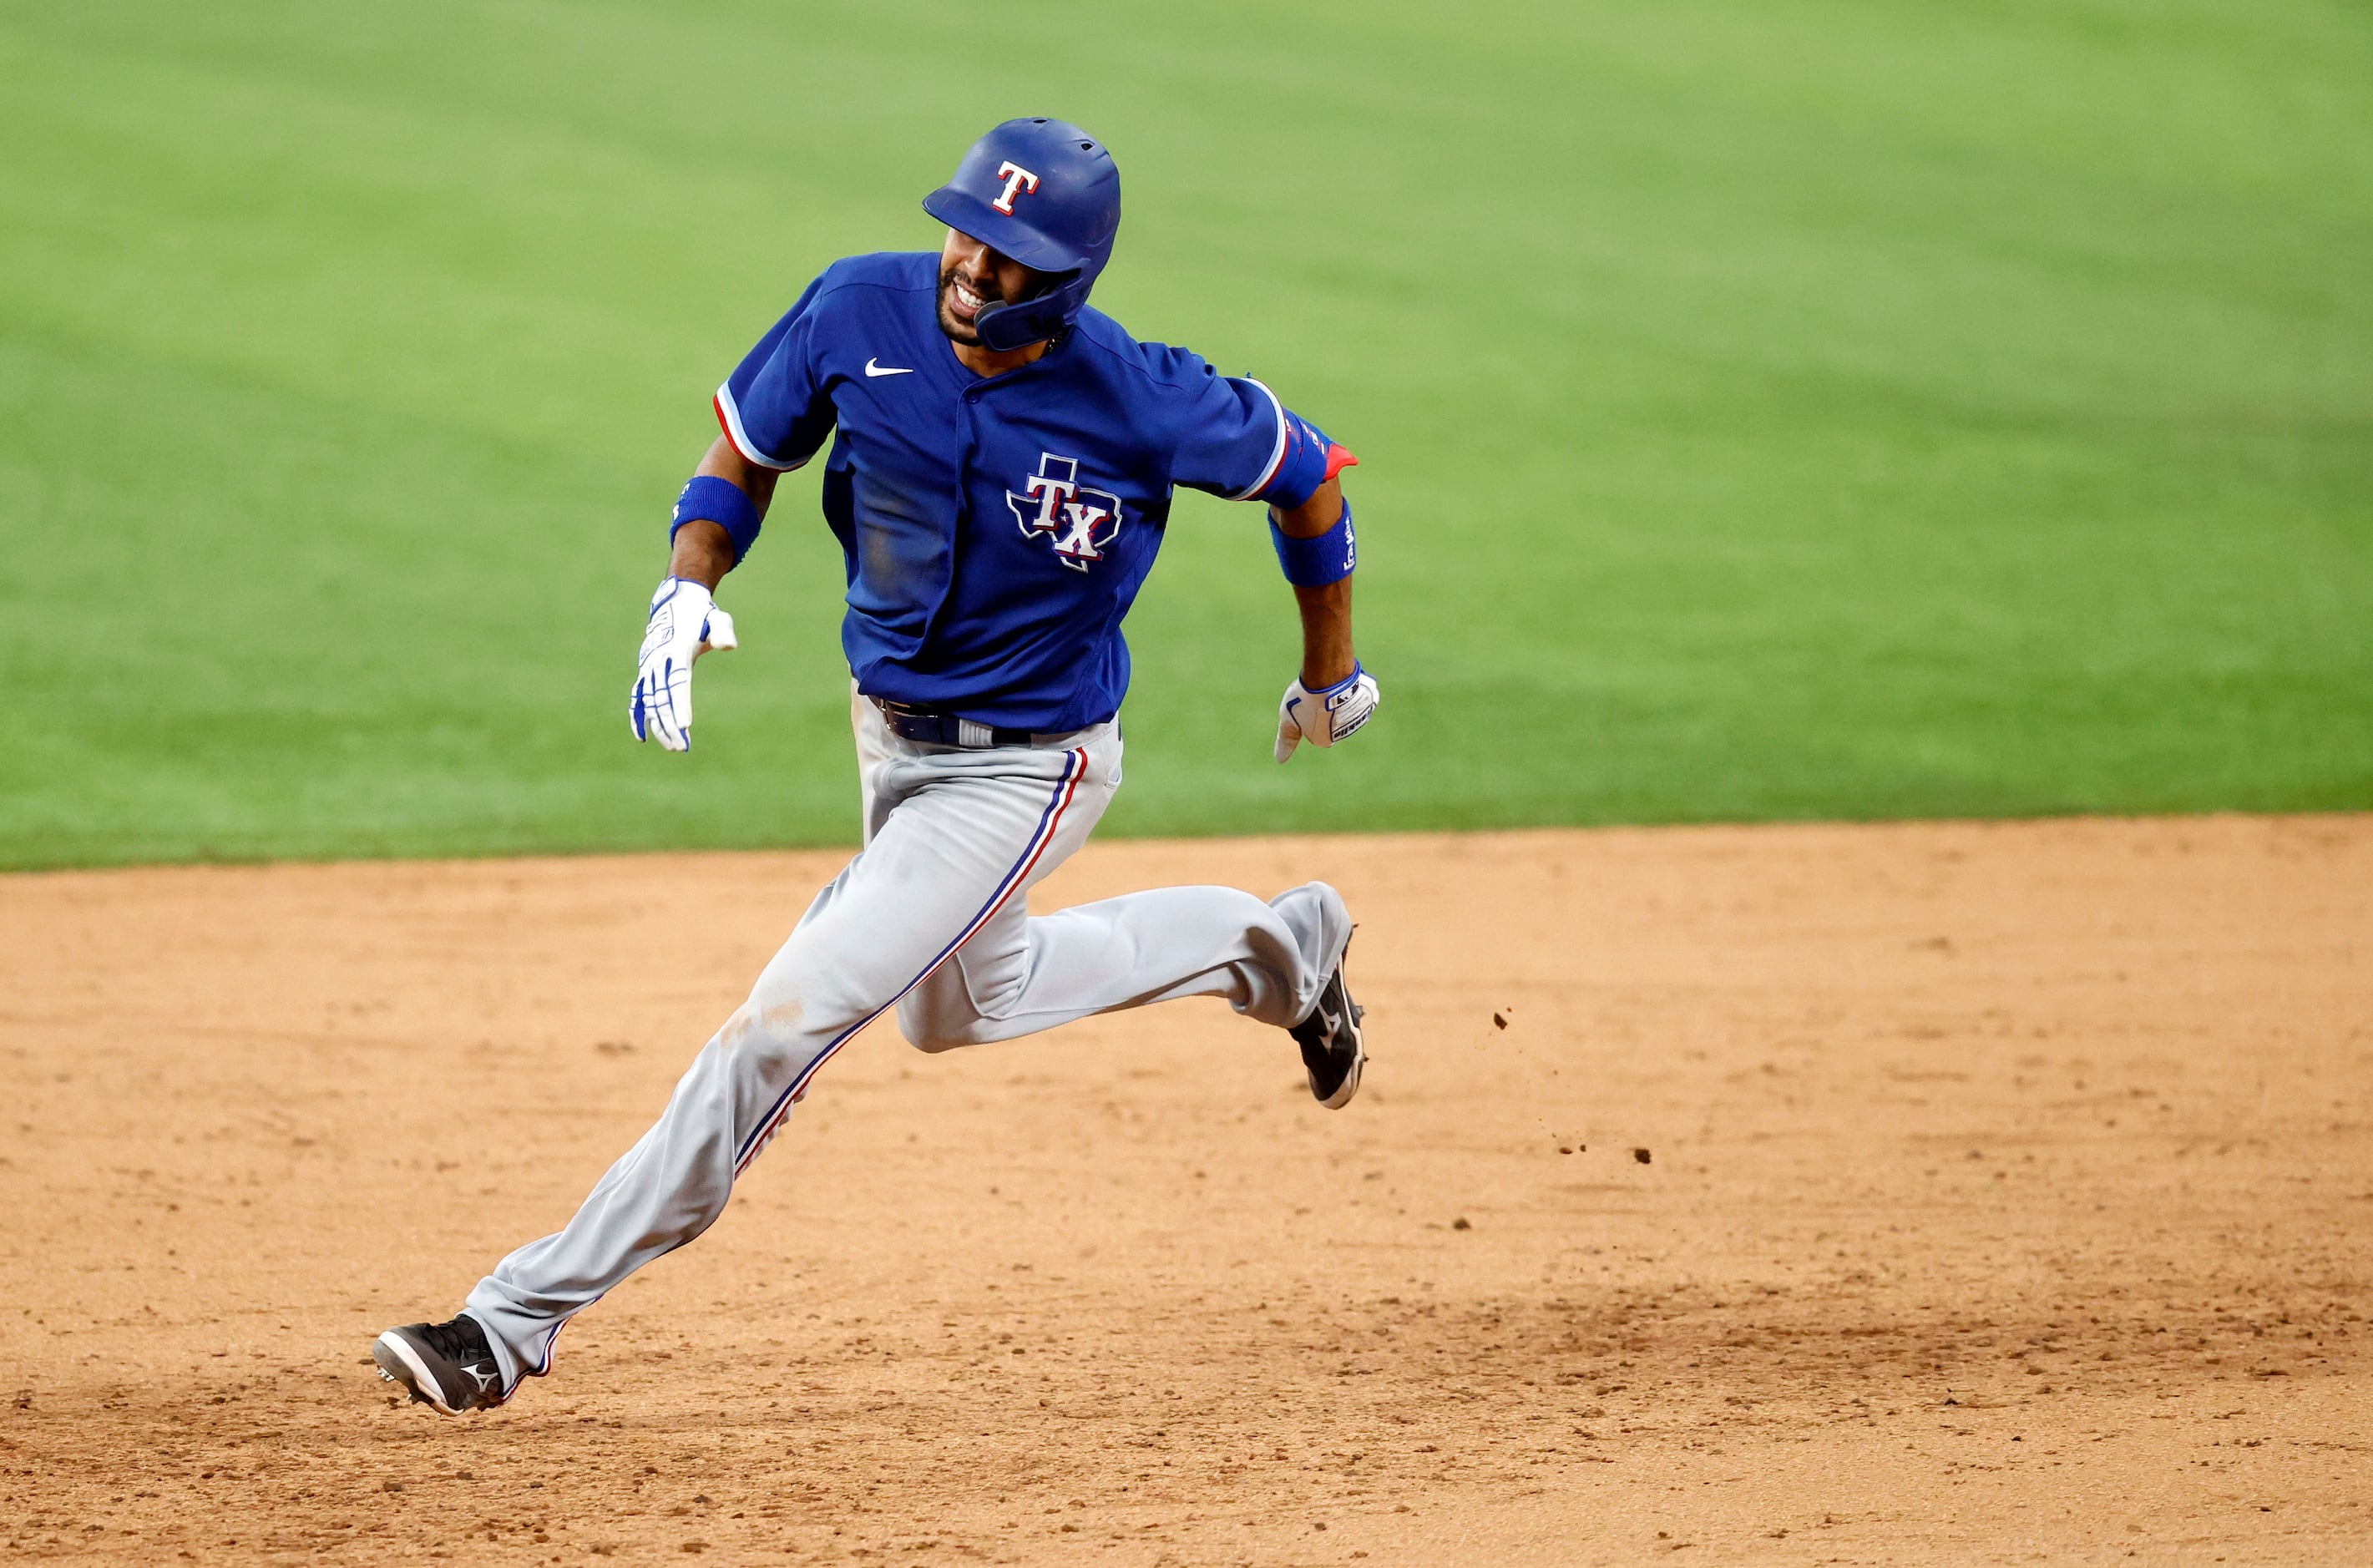 Texas Rangers Yadiel Rivera races around second base for a triple during an intrasquad...